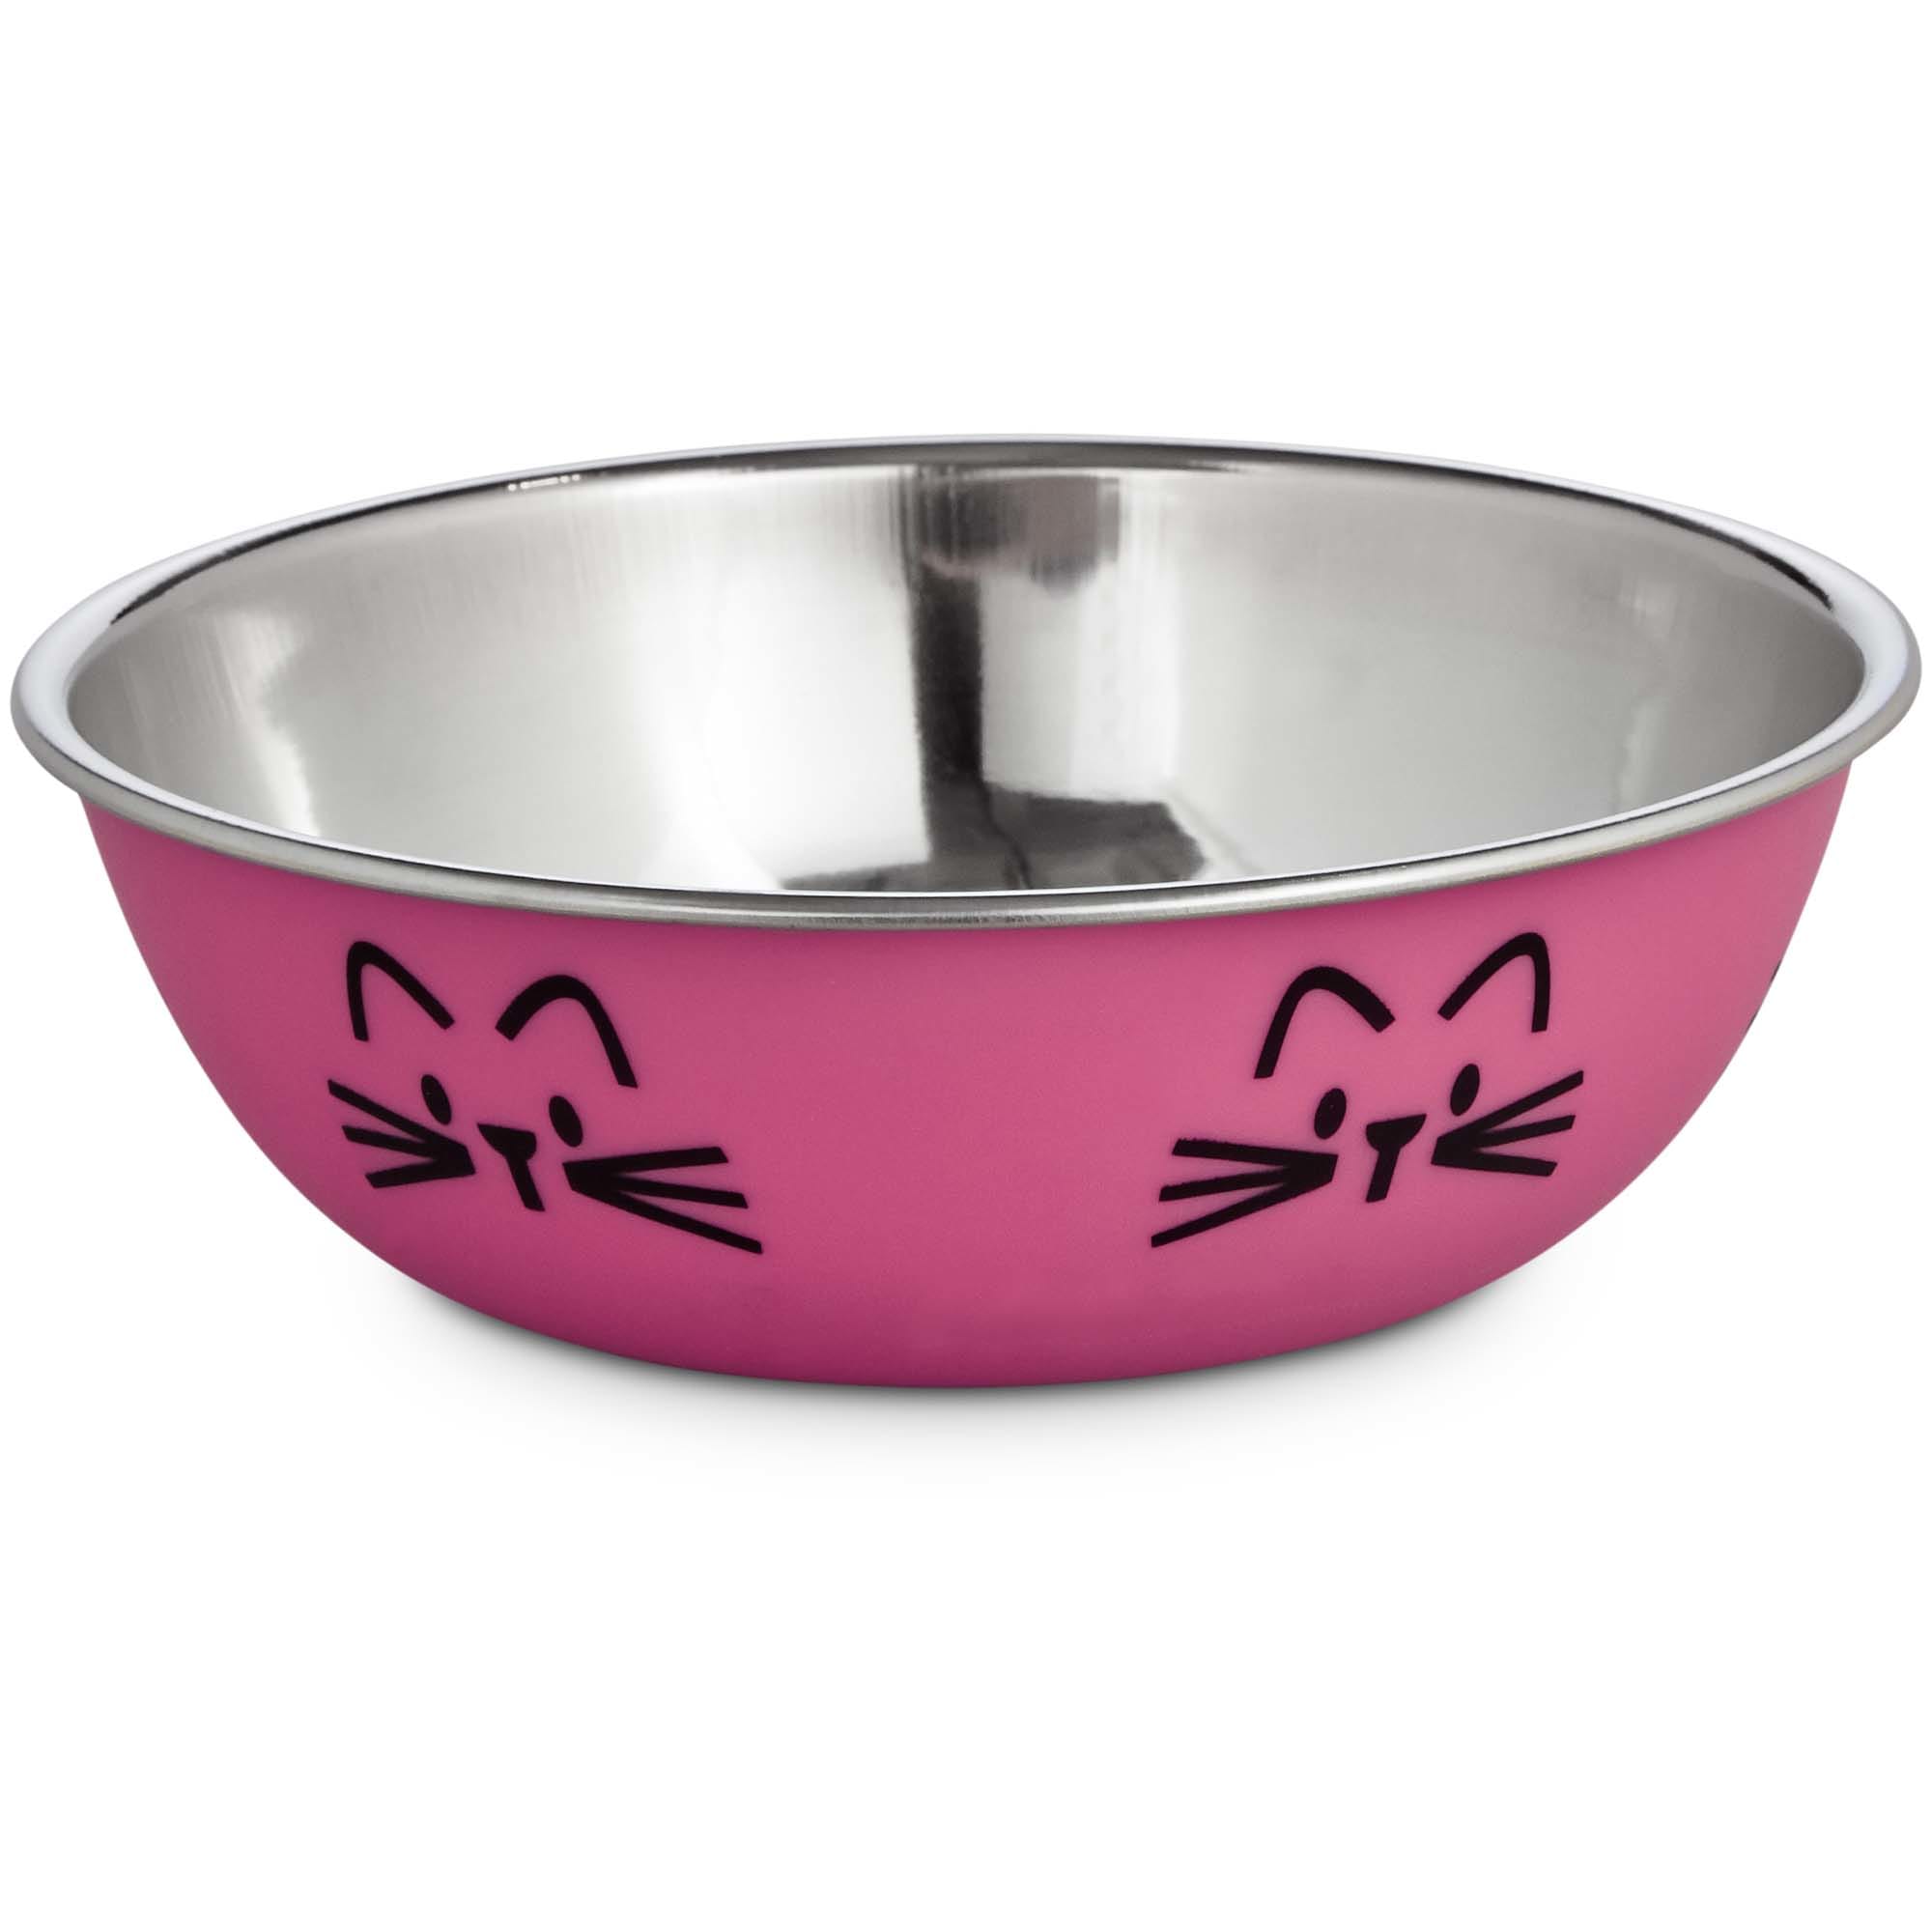 Harmony Pink Stainless Steel Cat Bowl 